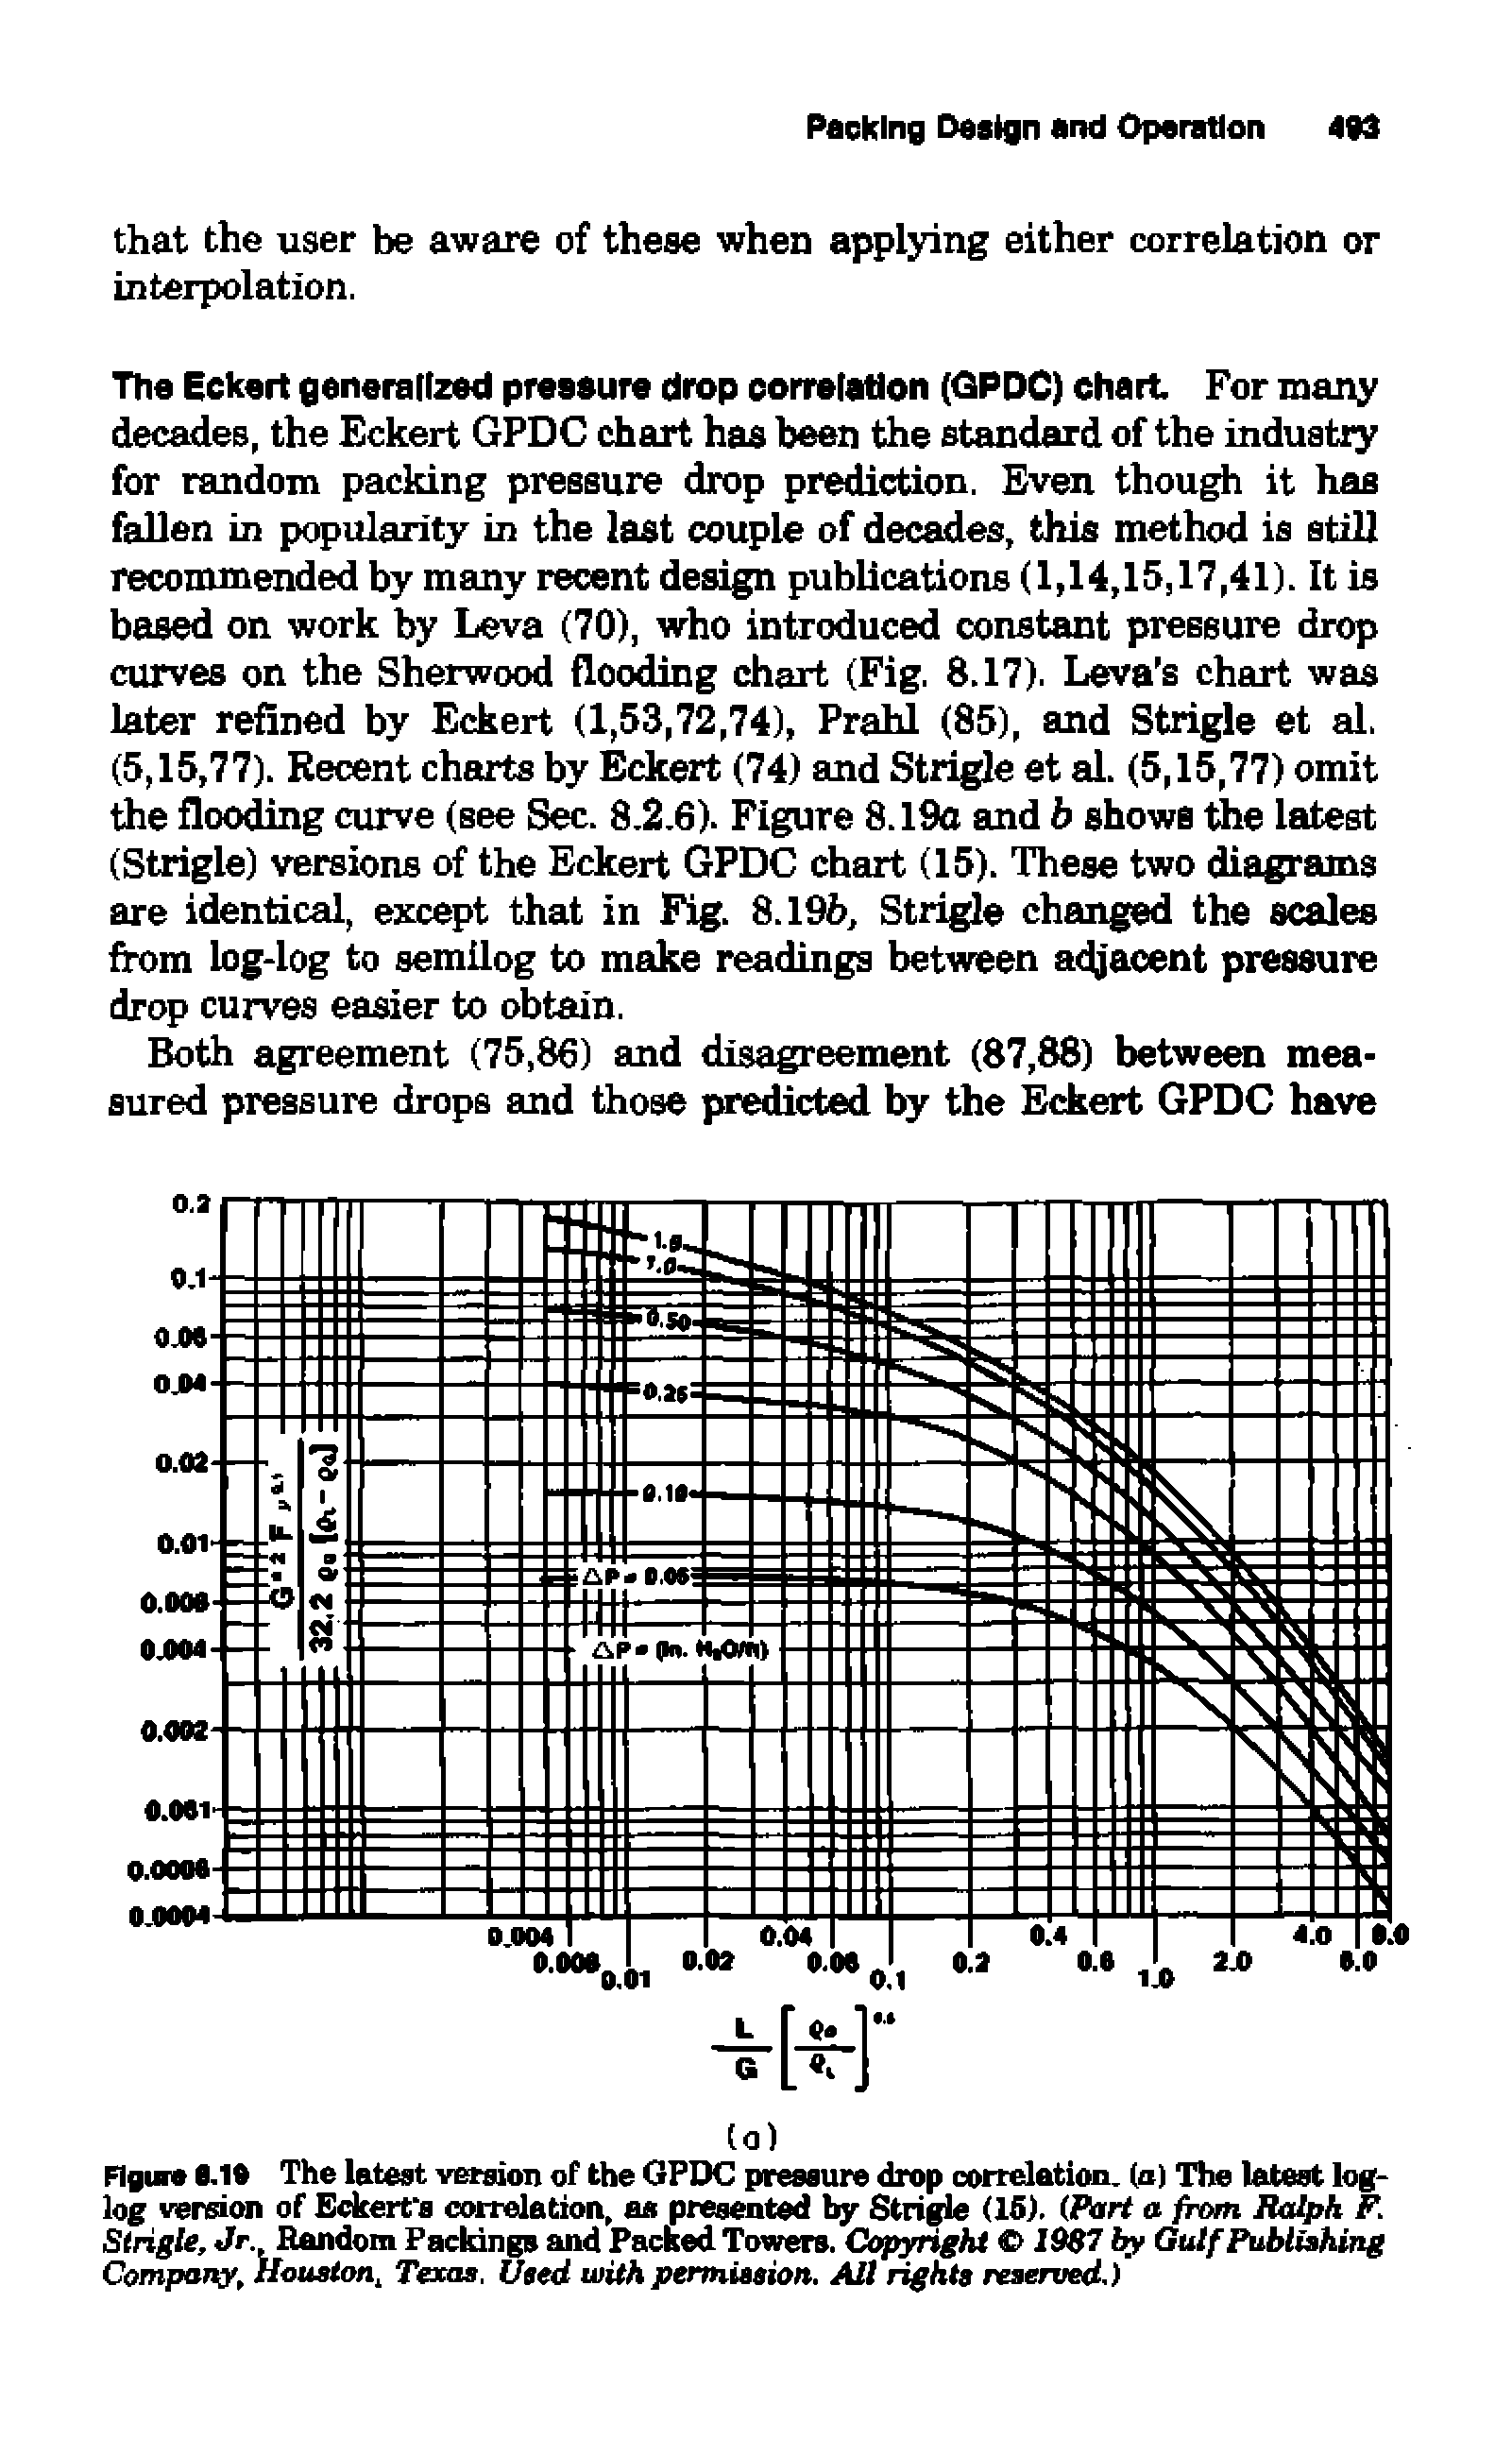 Figure 8.19 The latest version of the GPDC pressure drop correlation, (a) The latest log-log version of Eckert s correlation, as presented by Strigle (15). (Part a from Ralph F. Strigle, Jr Random Packings and Packed Towers. Copyright 1987 by Gulf Publishing Company, Houston, Texas. Used with permission. All rights reserved.)...